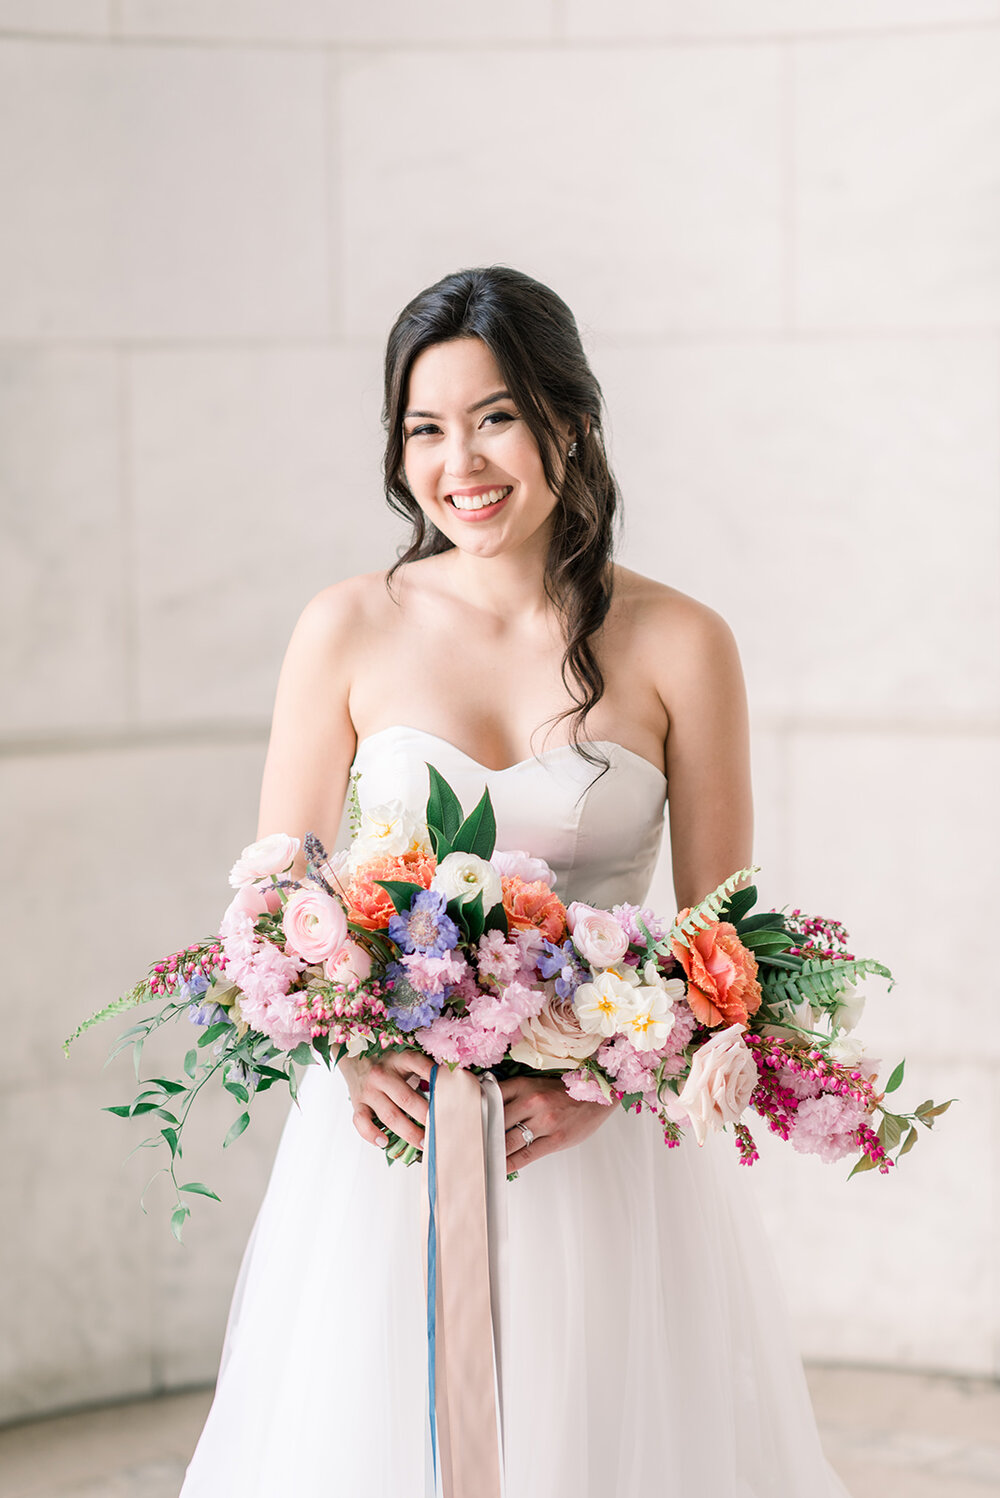 How to Style Your Hair Based on the Wedding Gown Neckline